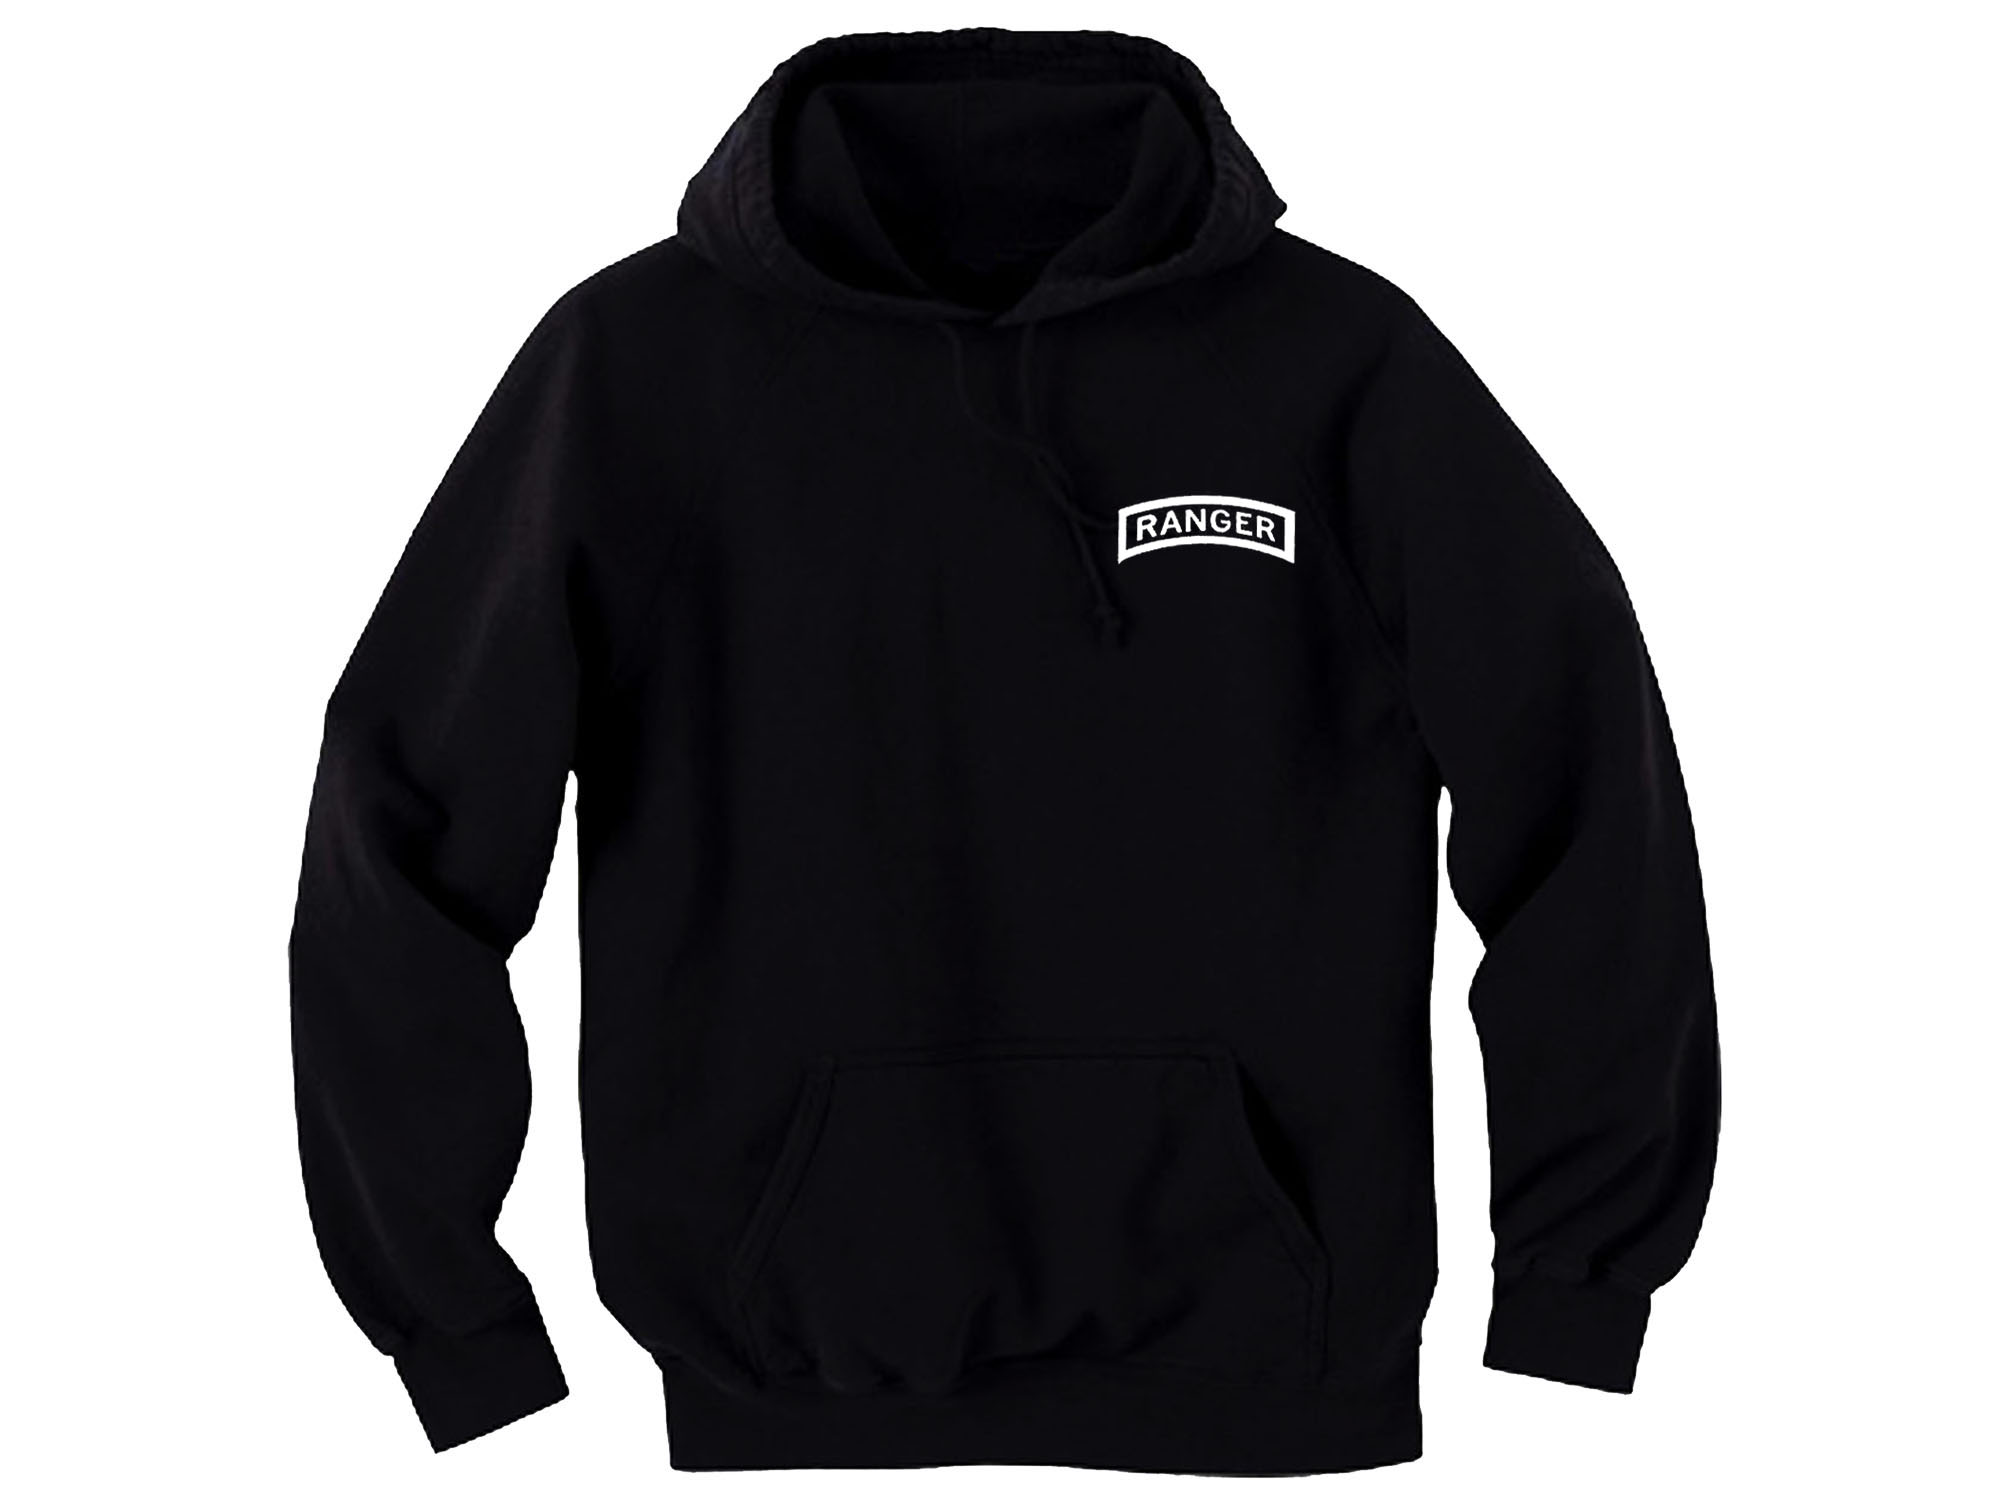 Ranger hoodie-US special forces